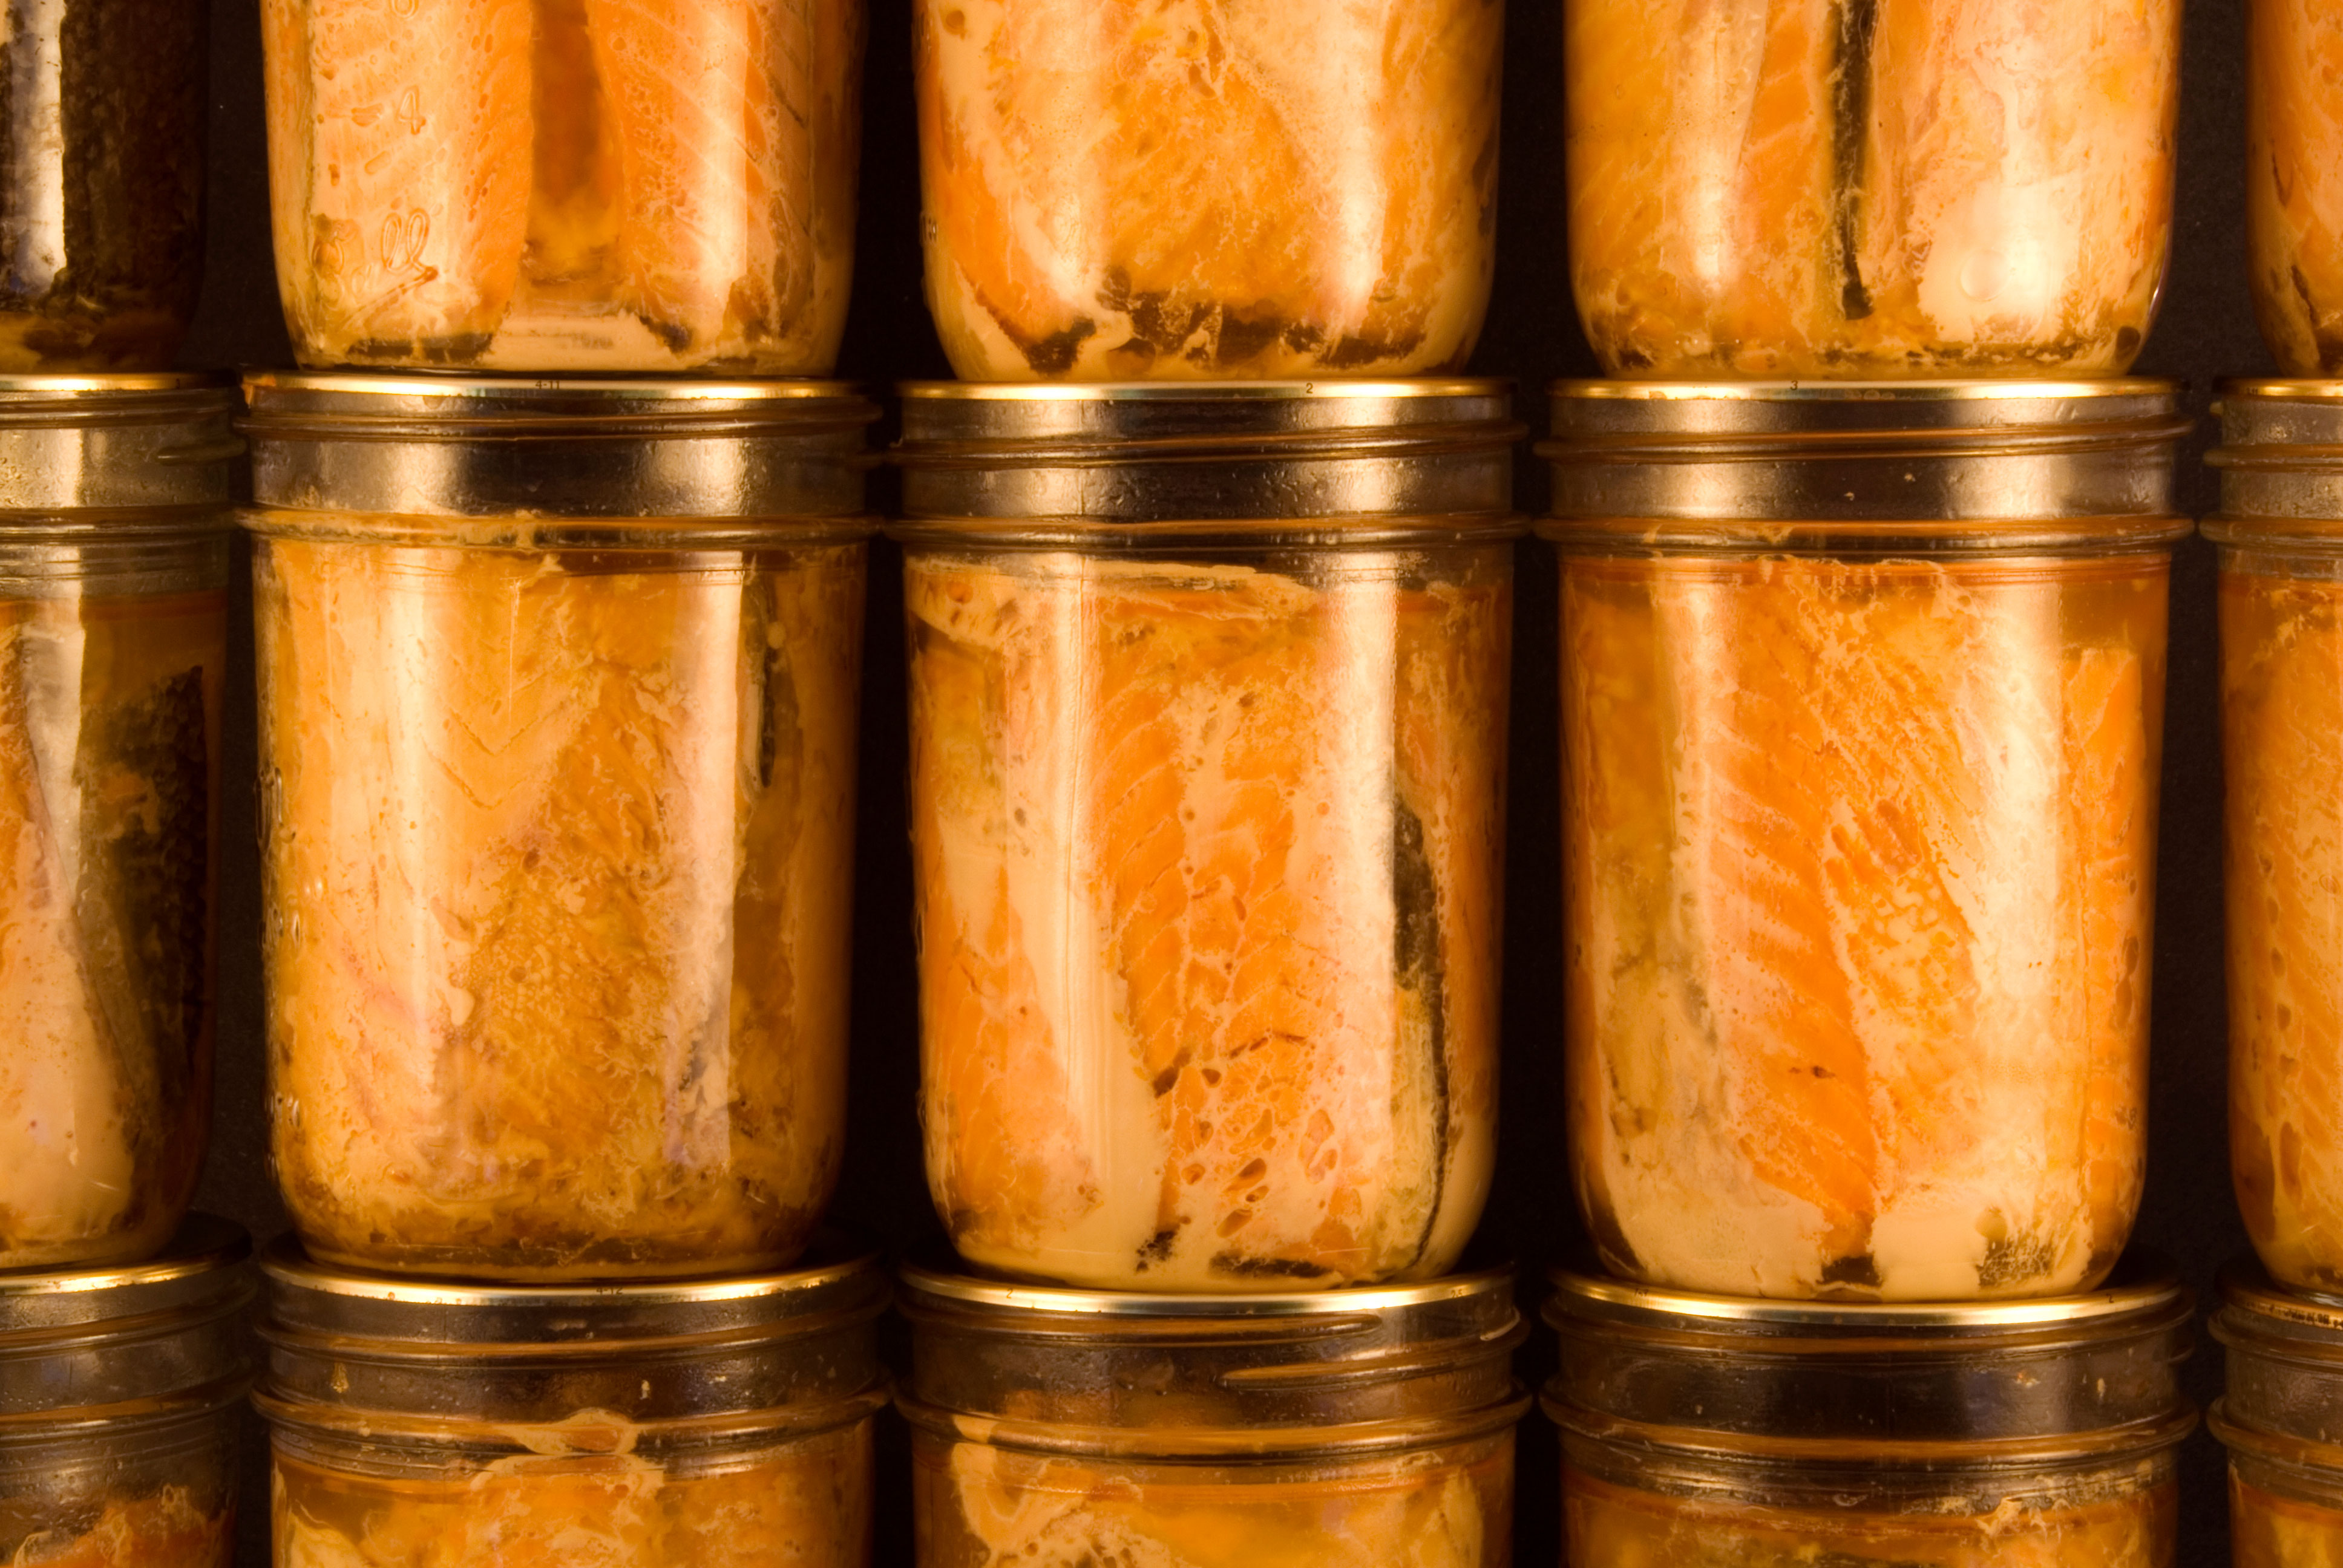 Several jars of canned salmon filets stacked neatly on top of each other.